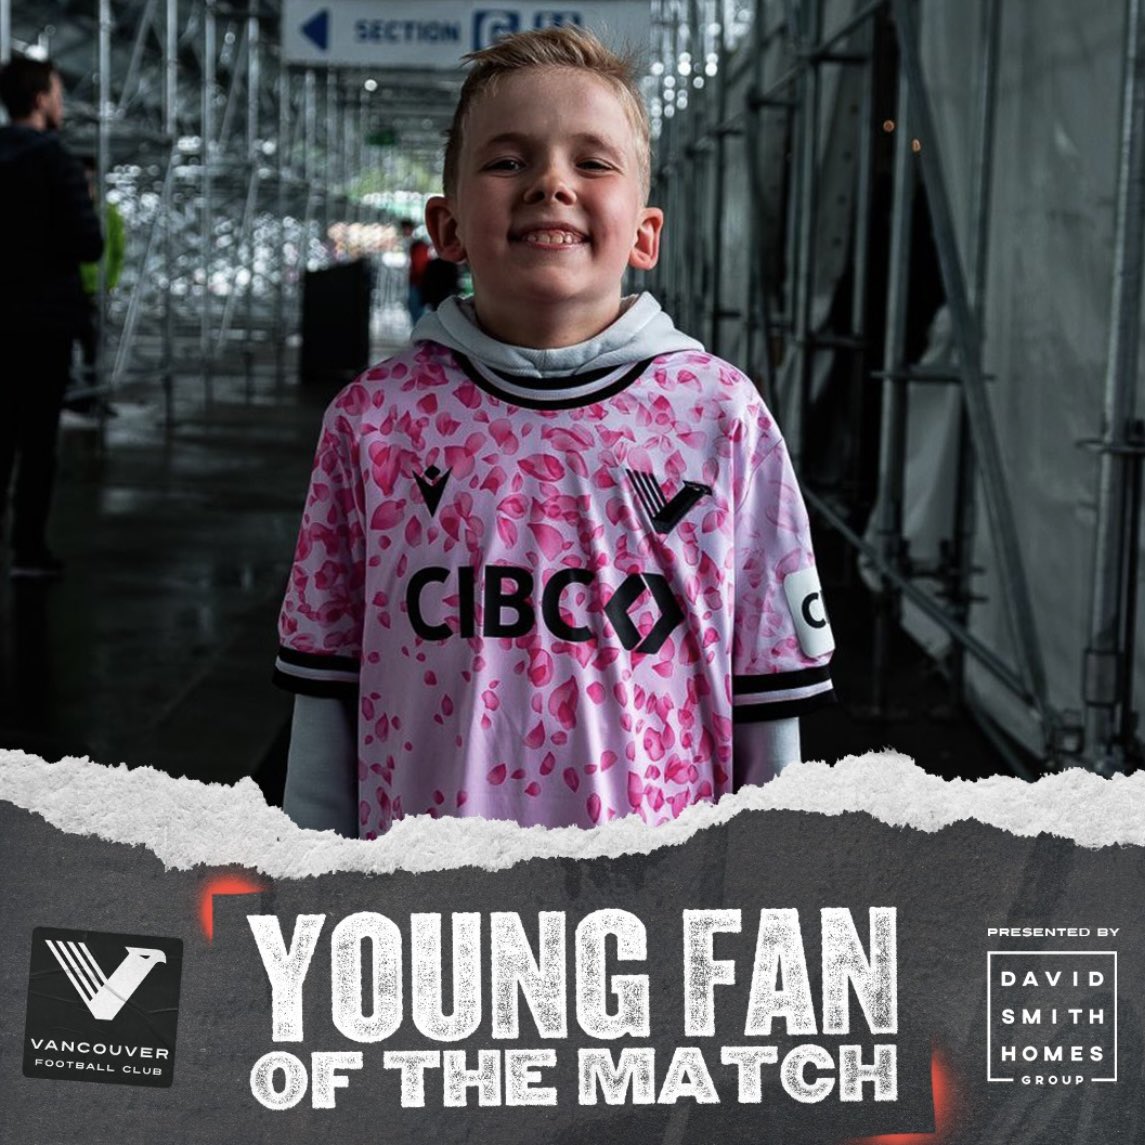 Congratulations to Parker, our Young Fan of the Match presented by @DavidSmithHomes 🫡🦅

#VancouverFC #CanPL